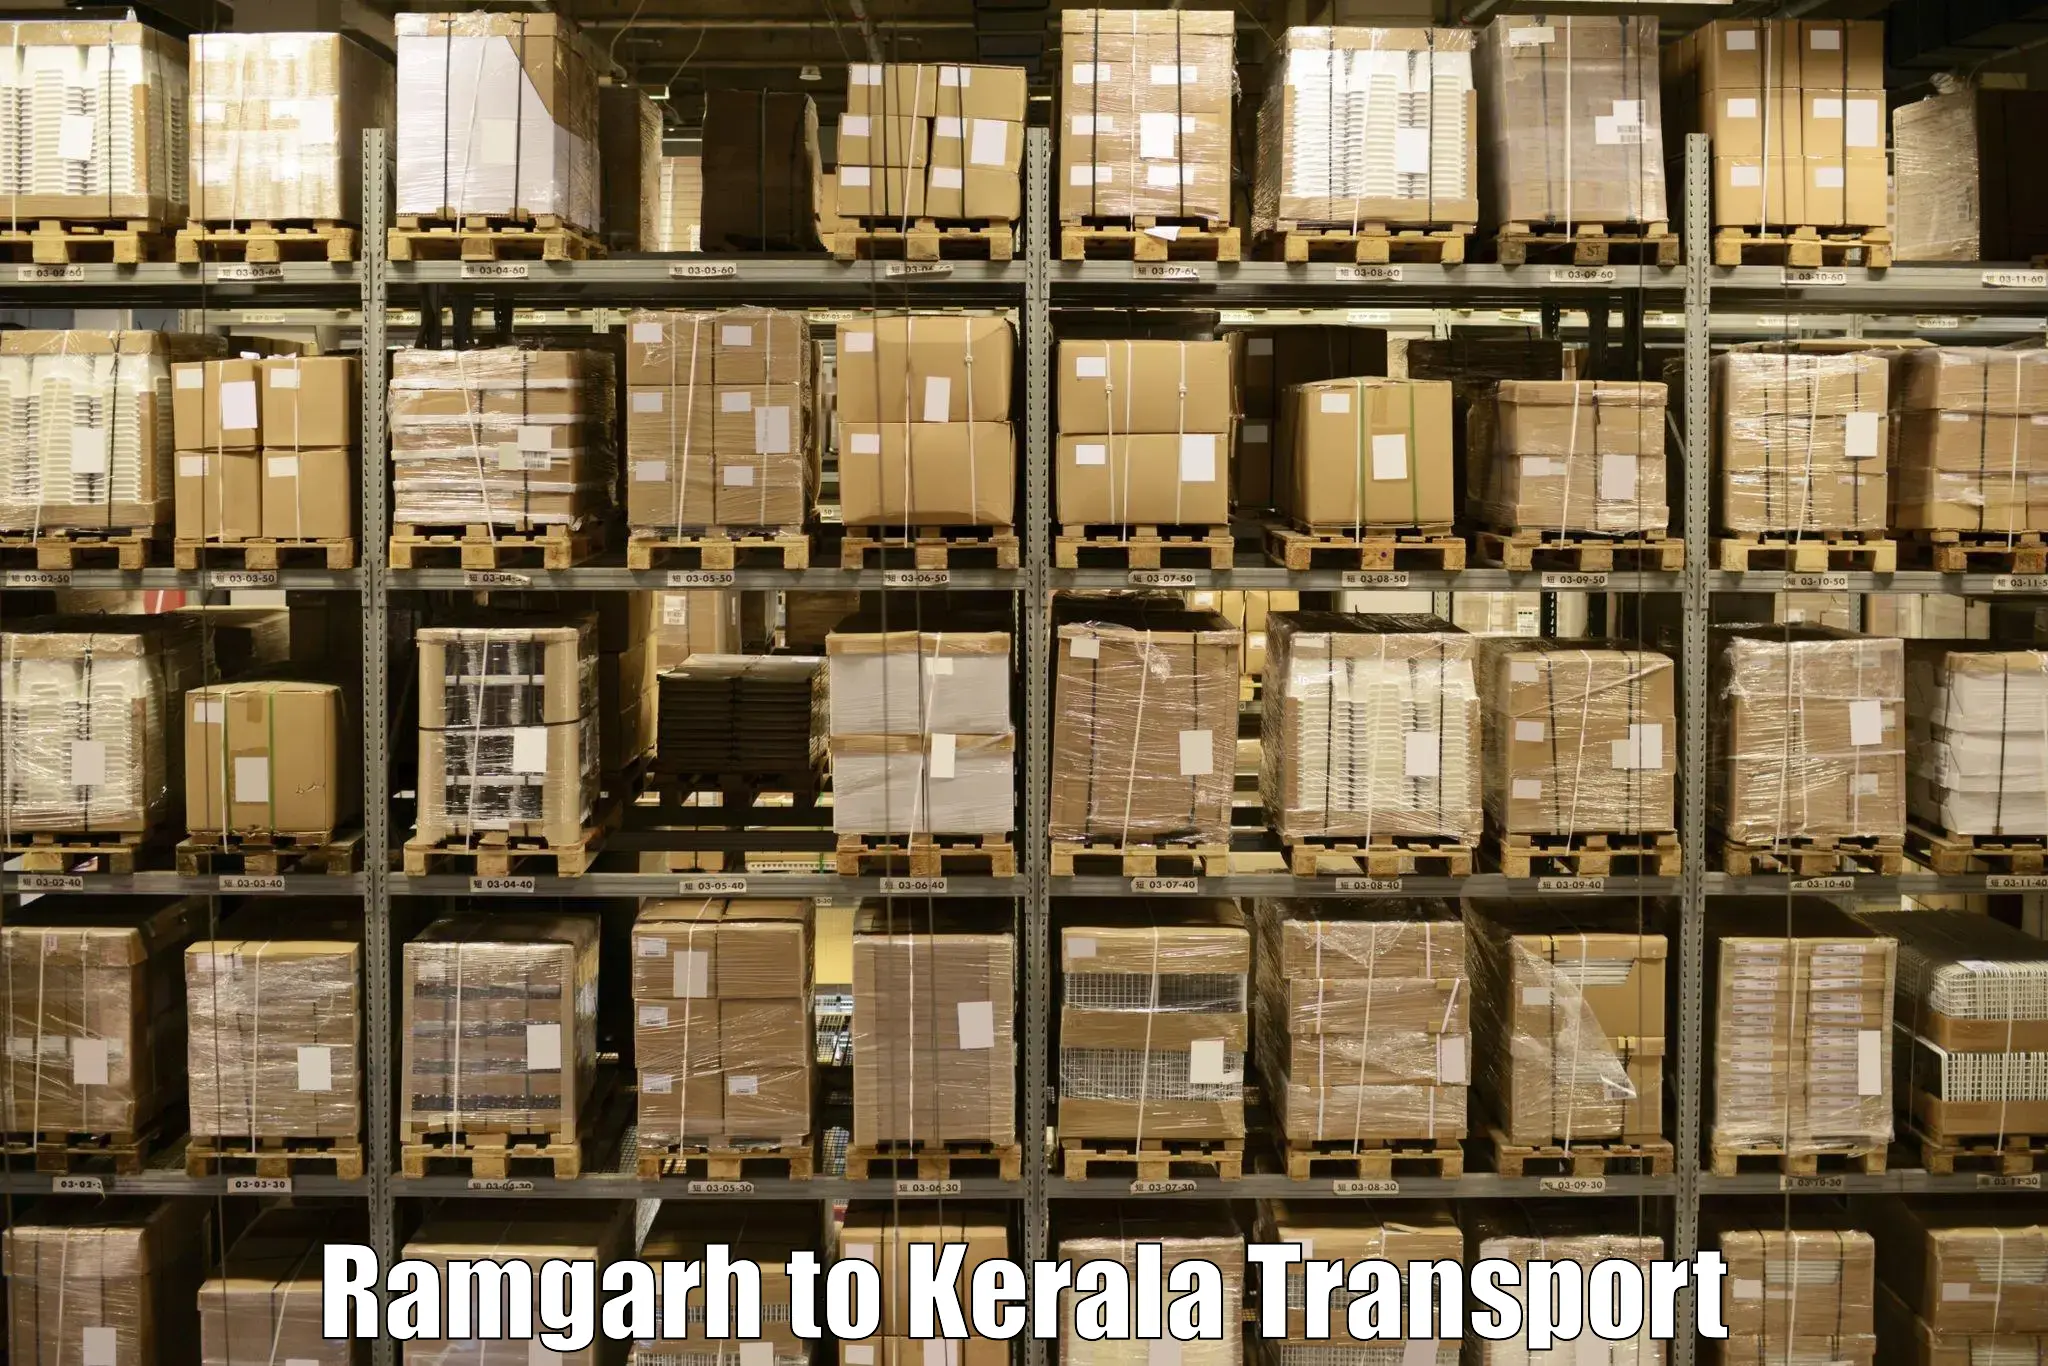 Shipping services in Ramgarh to Kollam